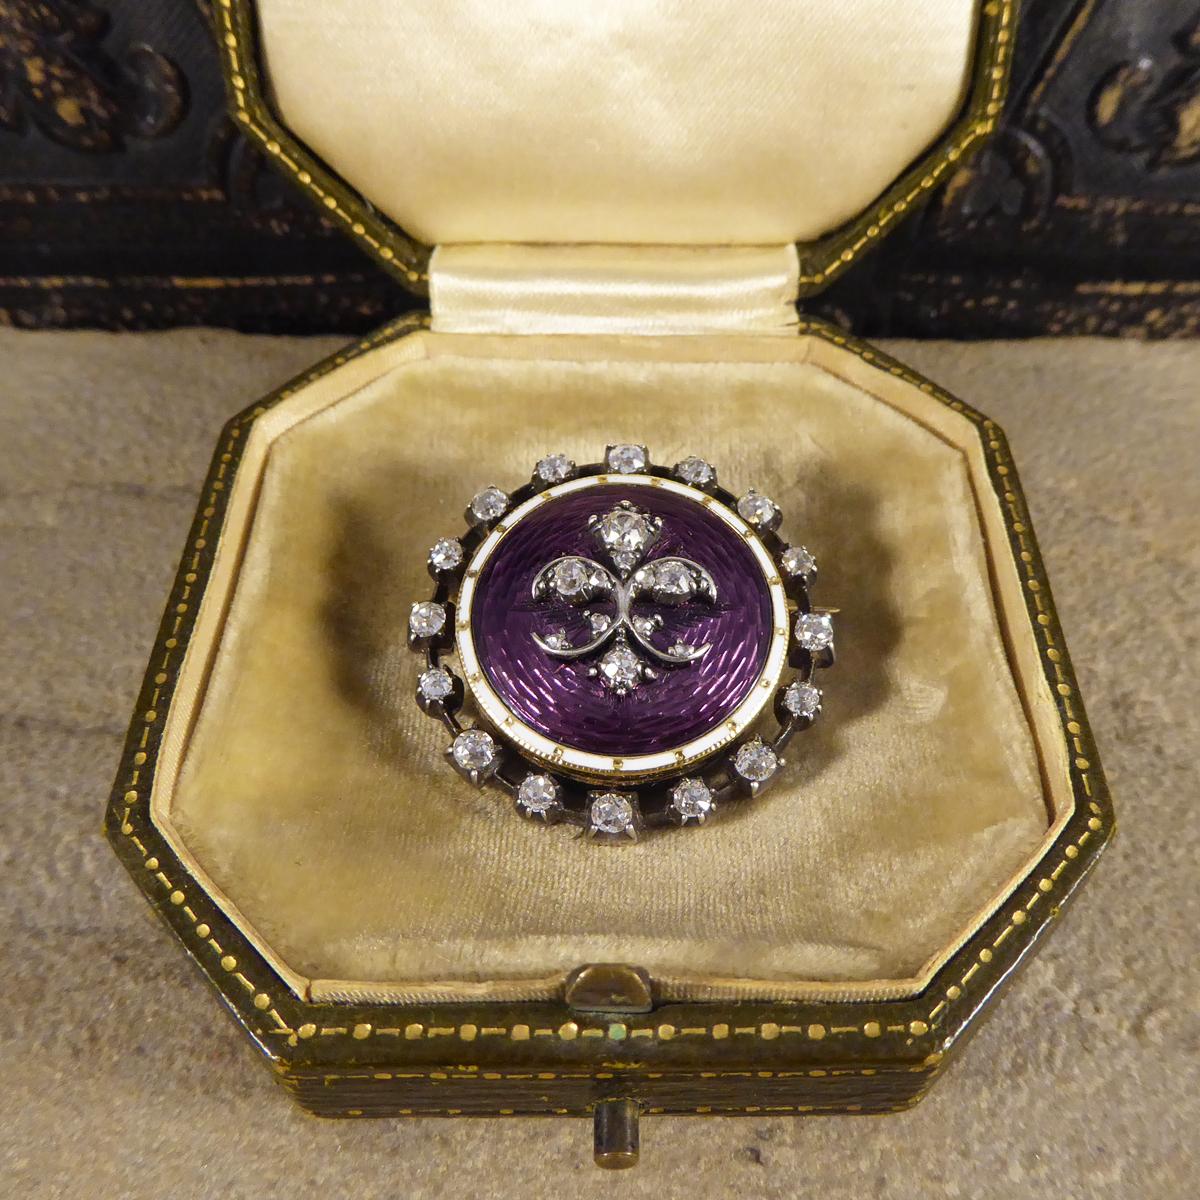 Women's or Men's Quality Antique Enamel Mourning Brooch Mounted in Gold and Silver in Antique Box